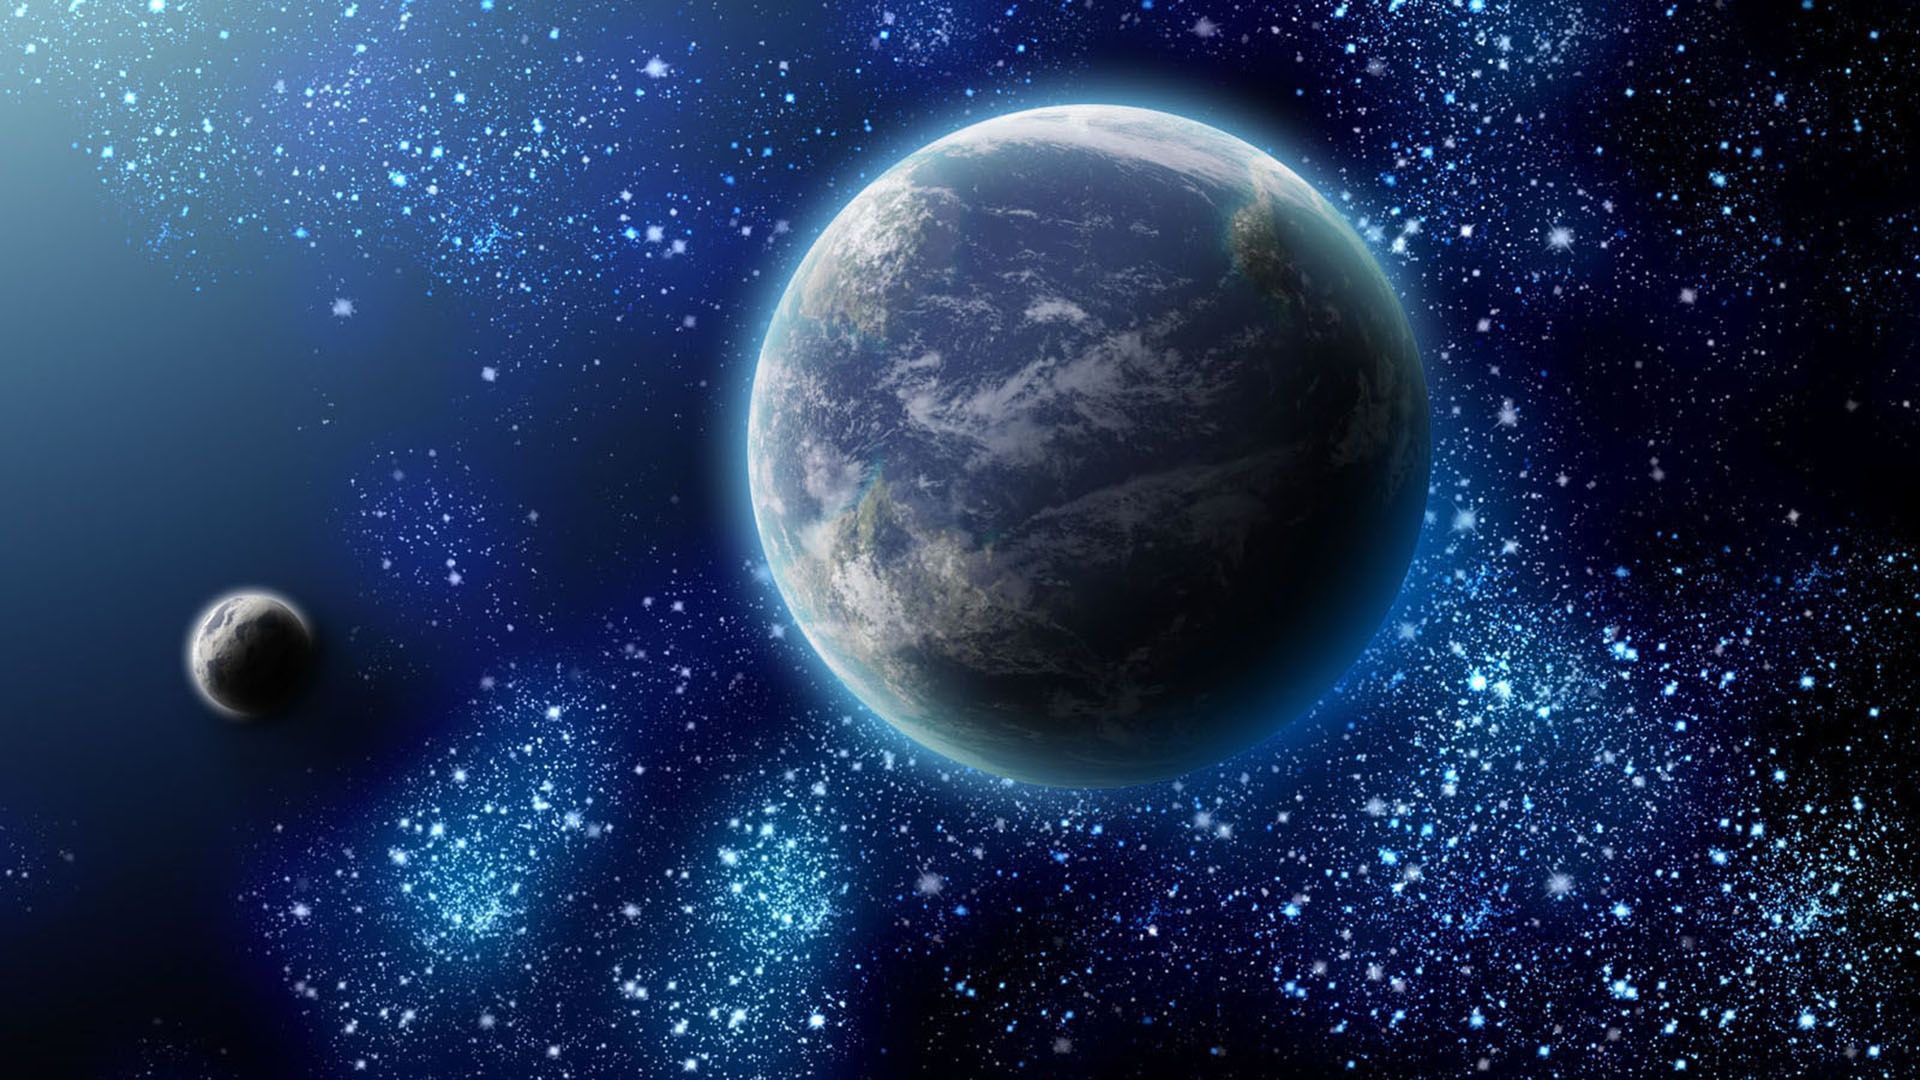 Cool space planets backgrounds for desktop 1920x1080